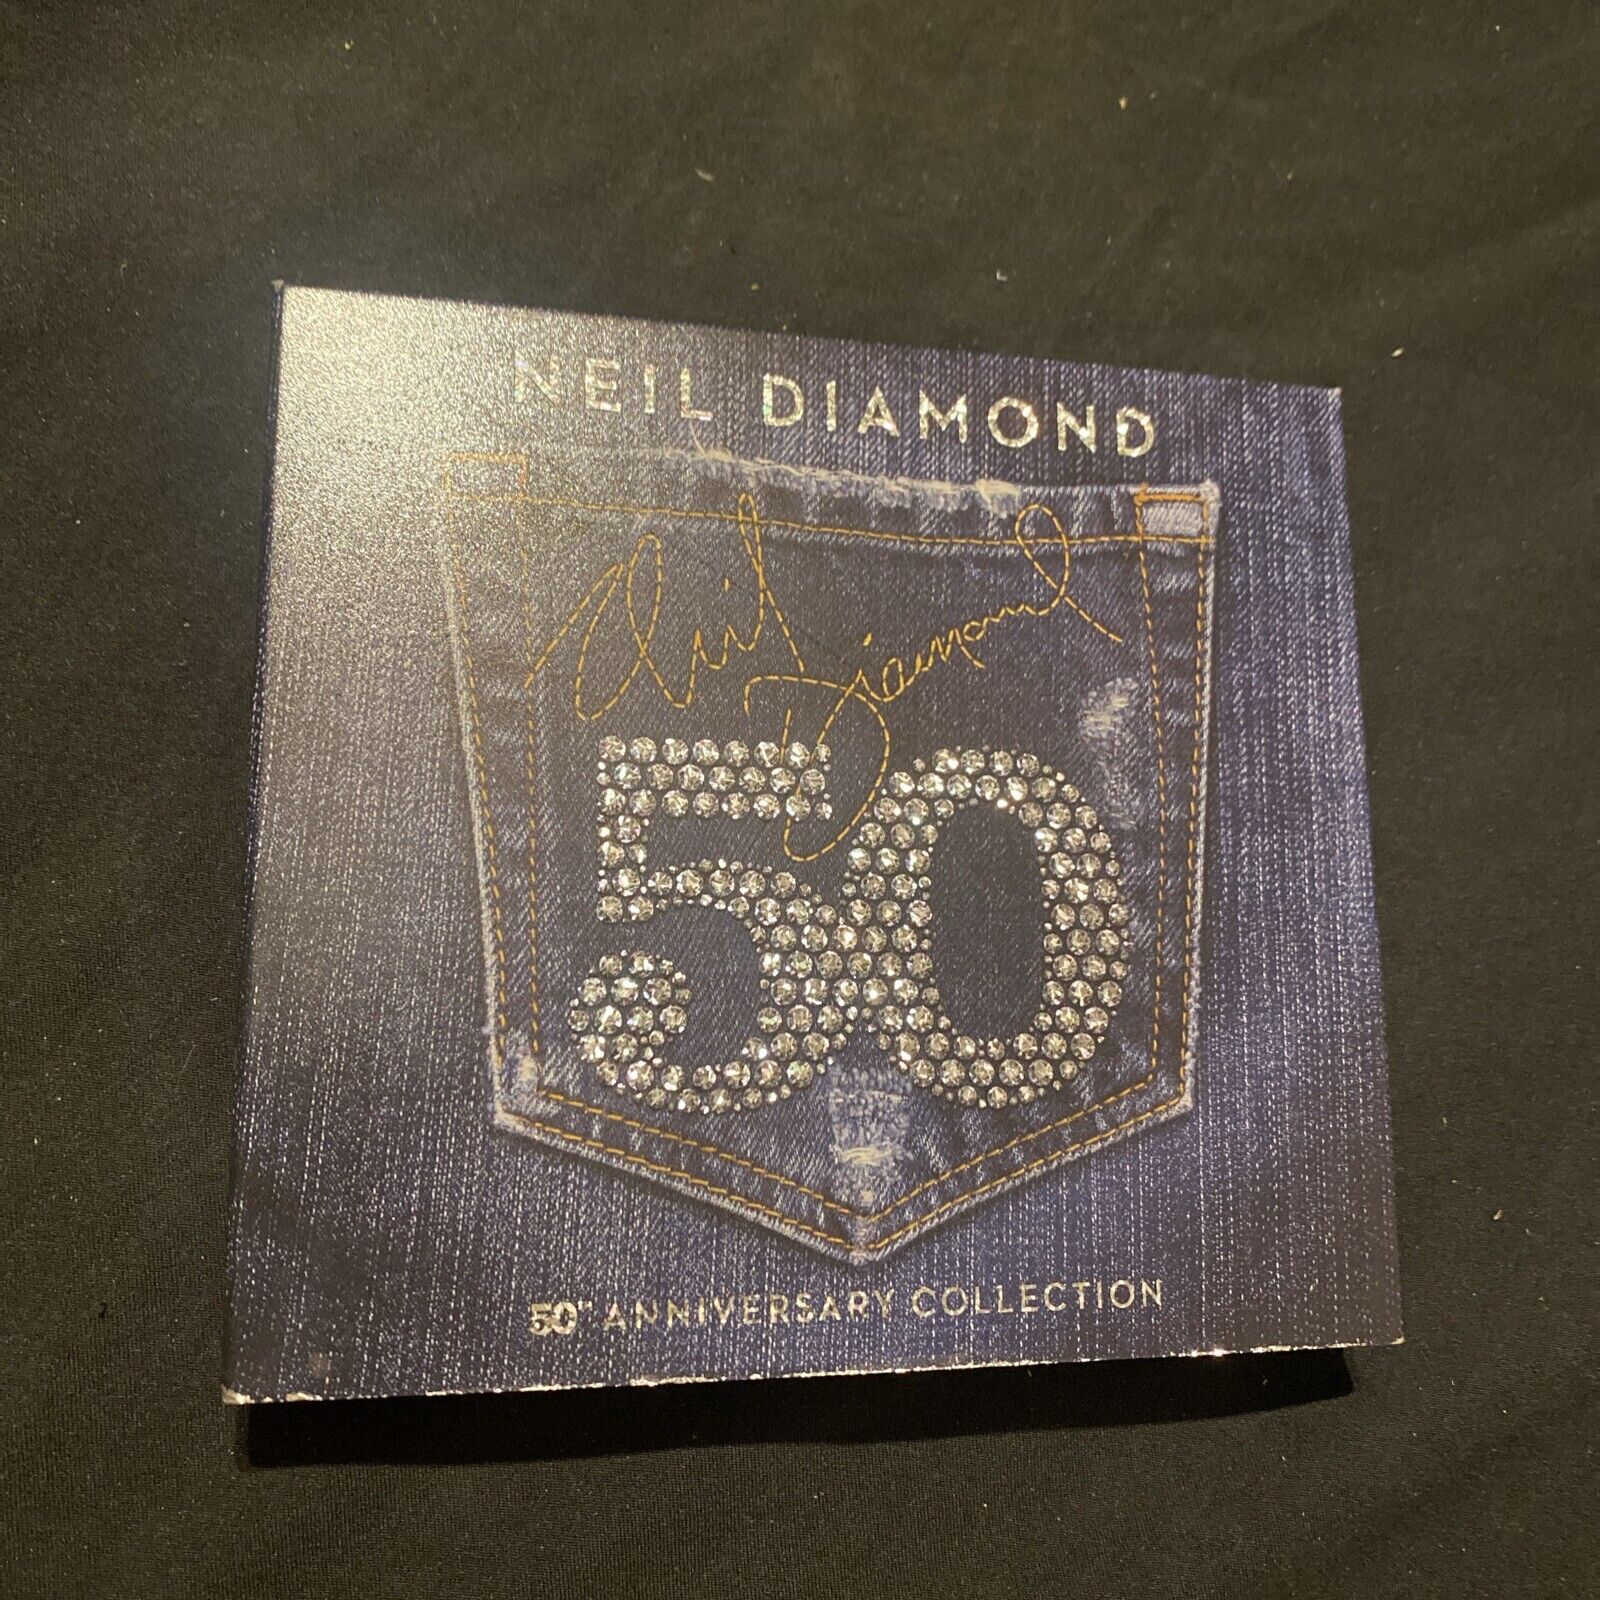 50th Anniversary Collection by Neil Diamond (CD, 2017)